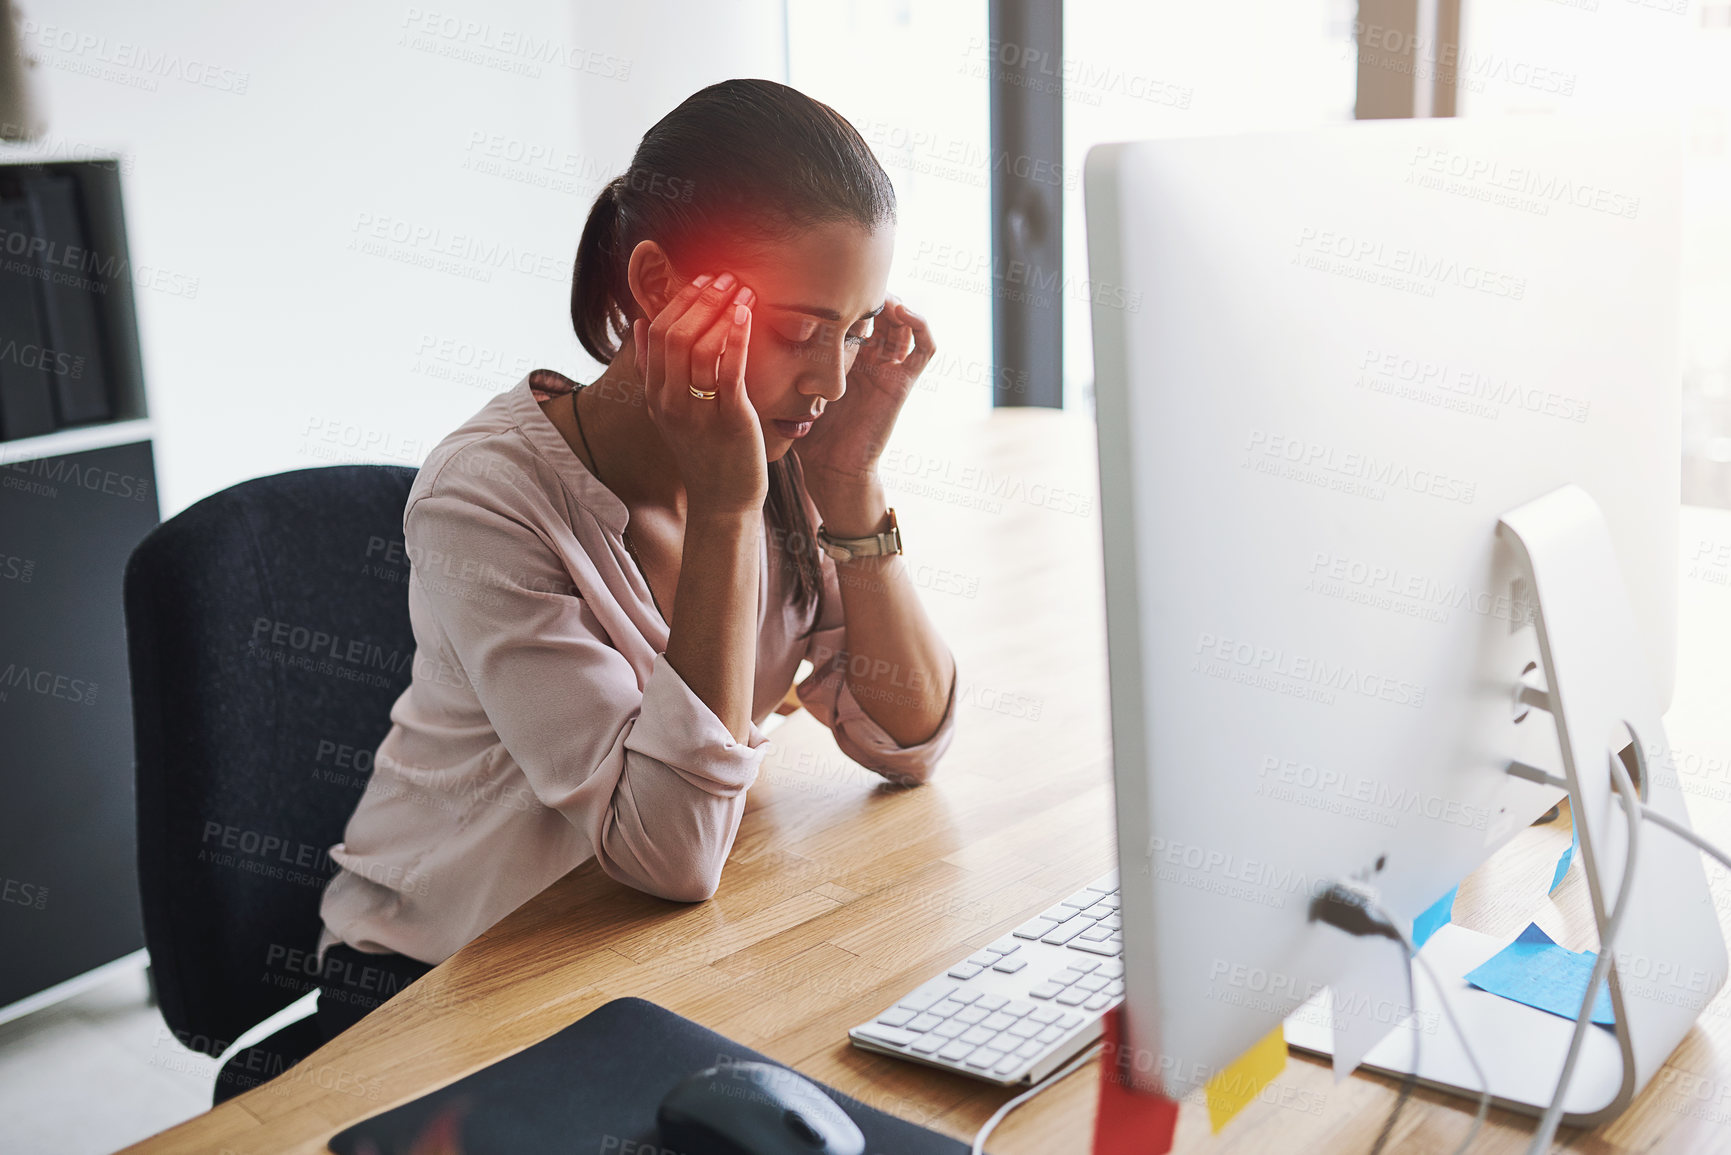 Buy stock photo Shot of a young businesswoman suffering with a headache while working in an office